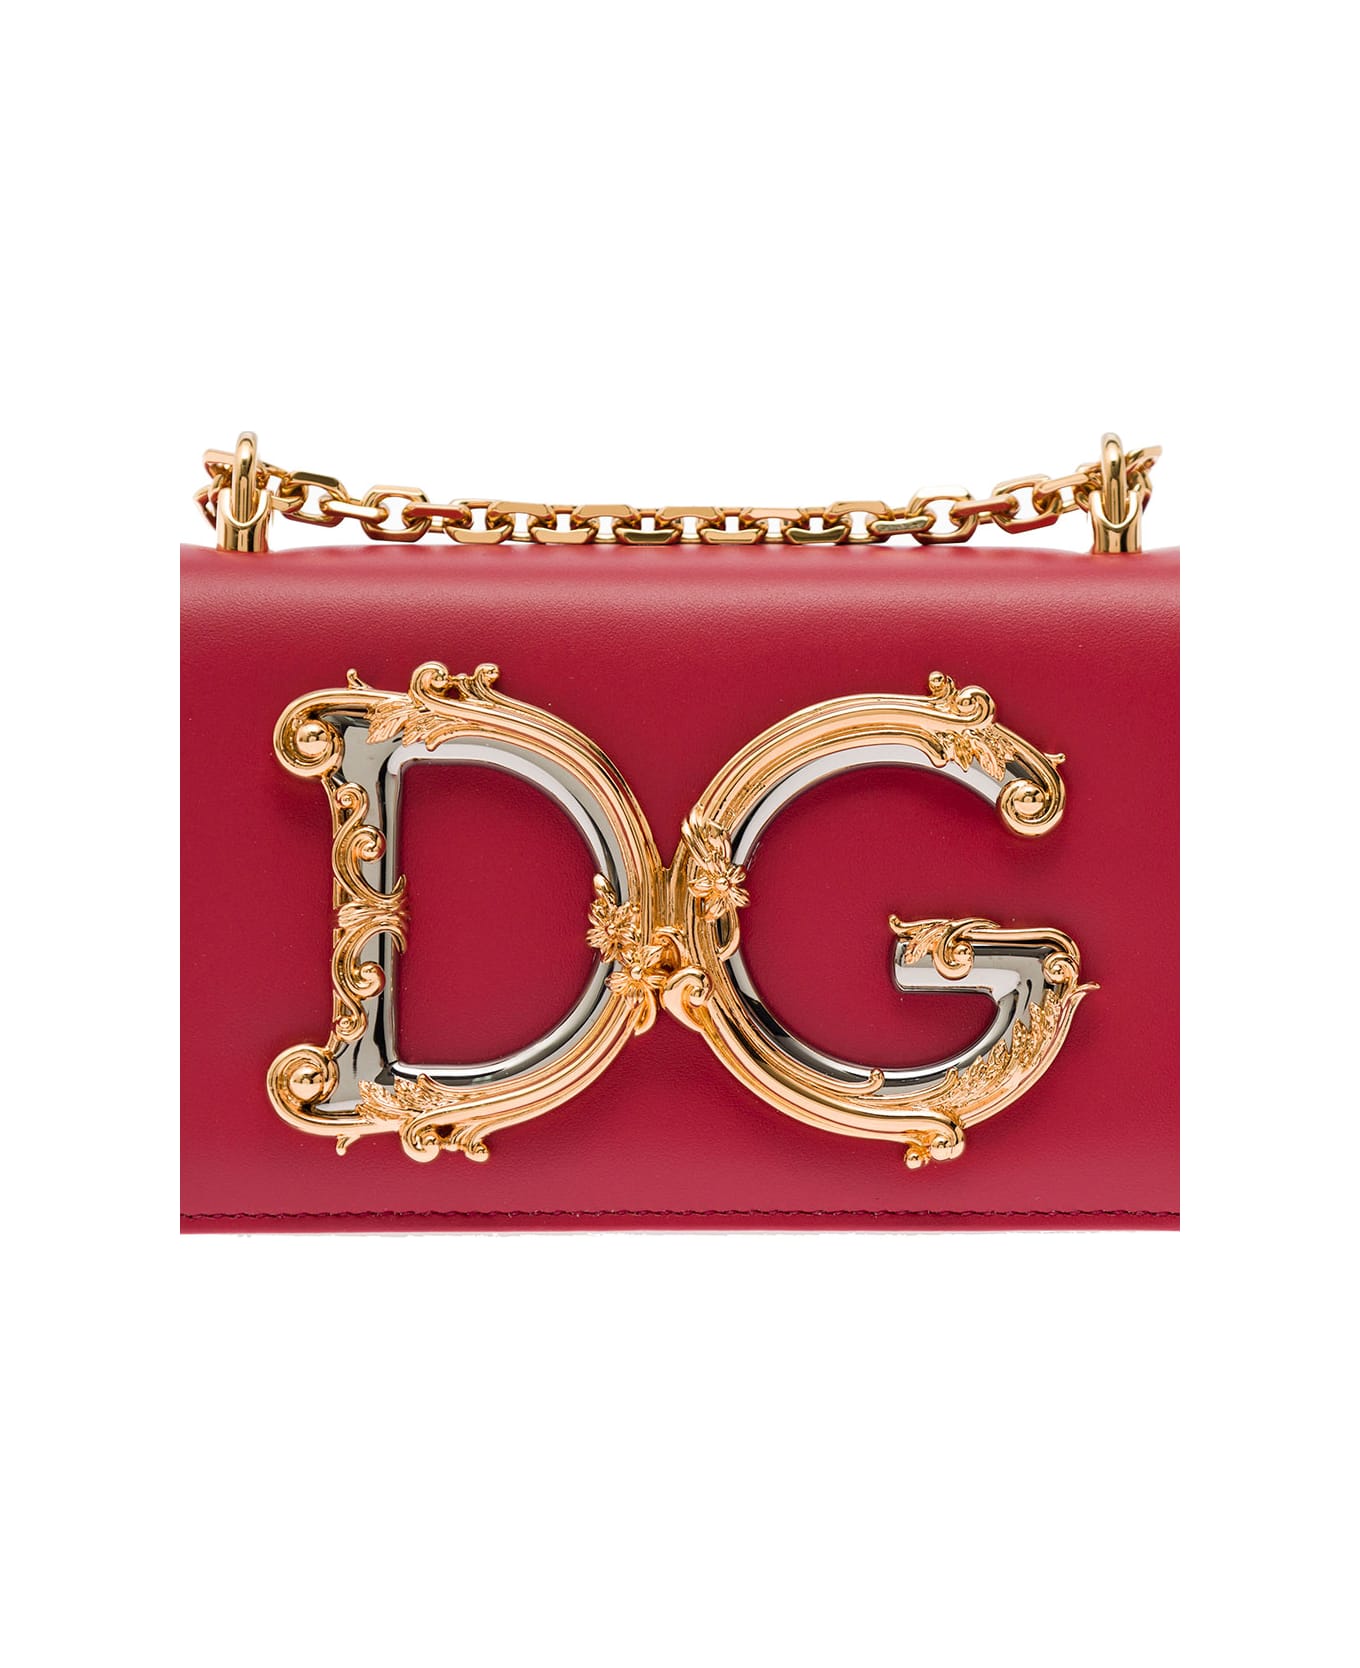 Dolce & Gabbana 'dg Girls' Red Phone Bag With Chain Strap And Baroque Logo In Leather Woman - Multicolor